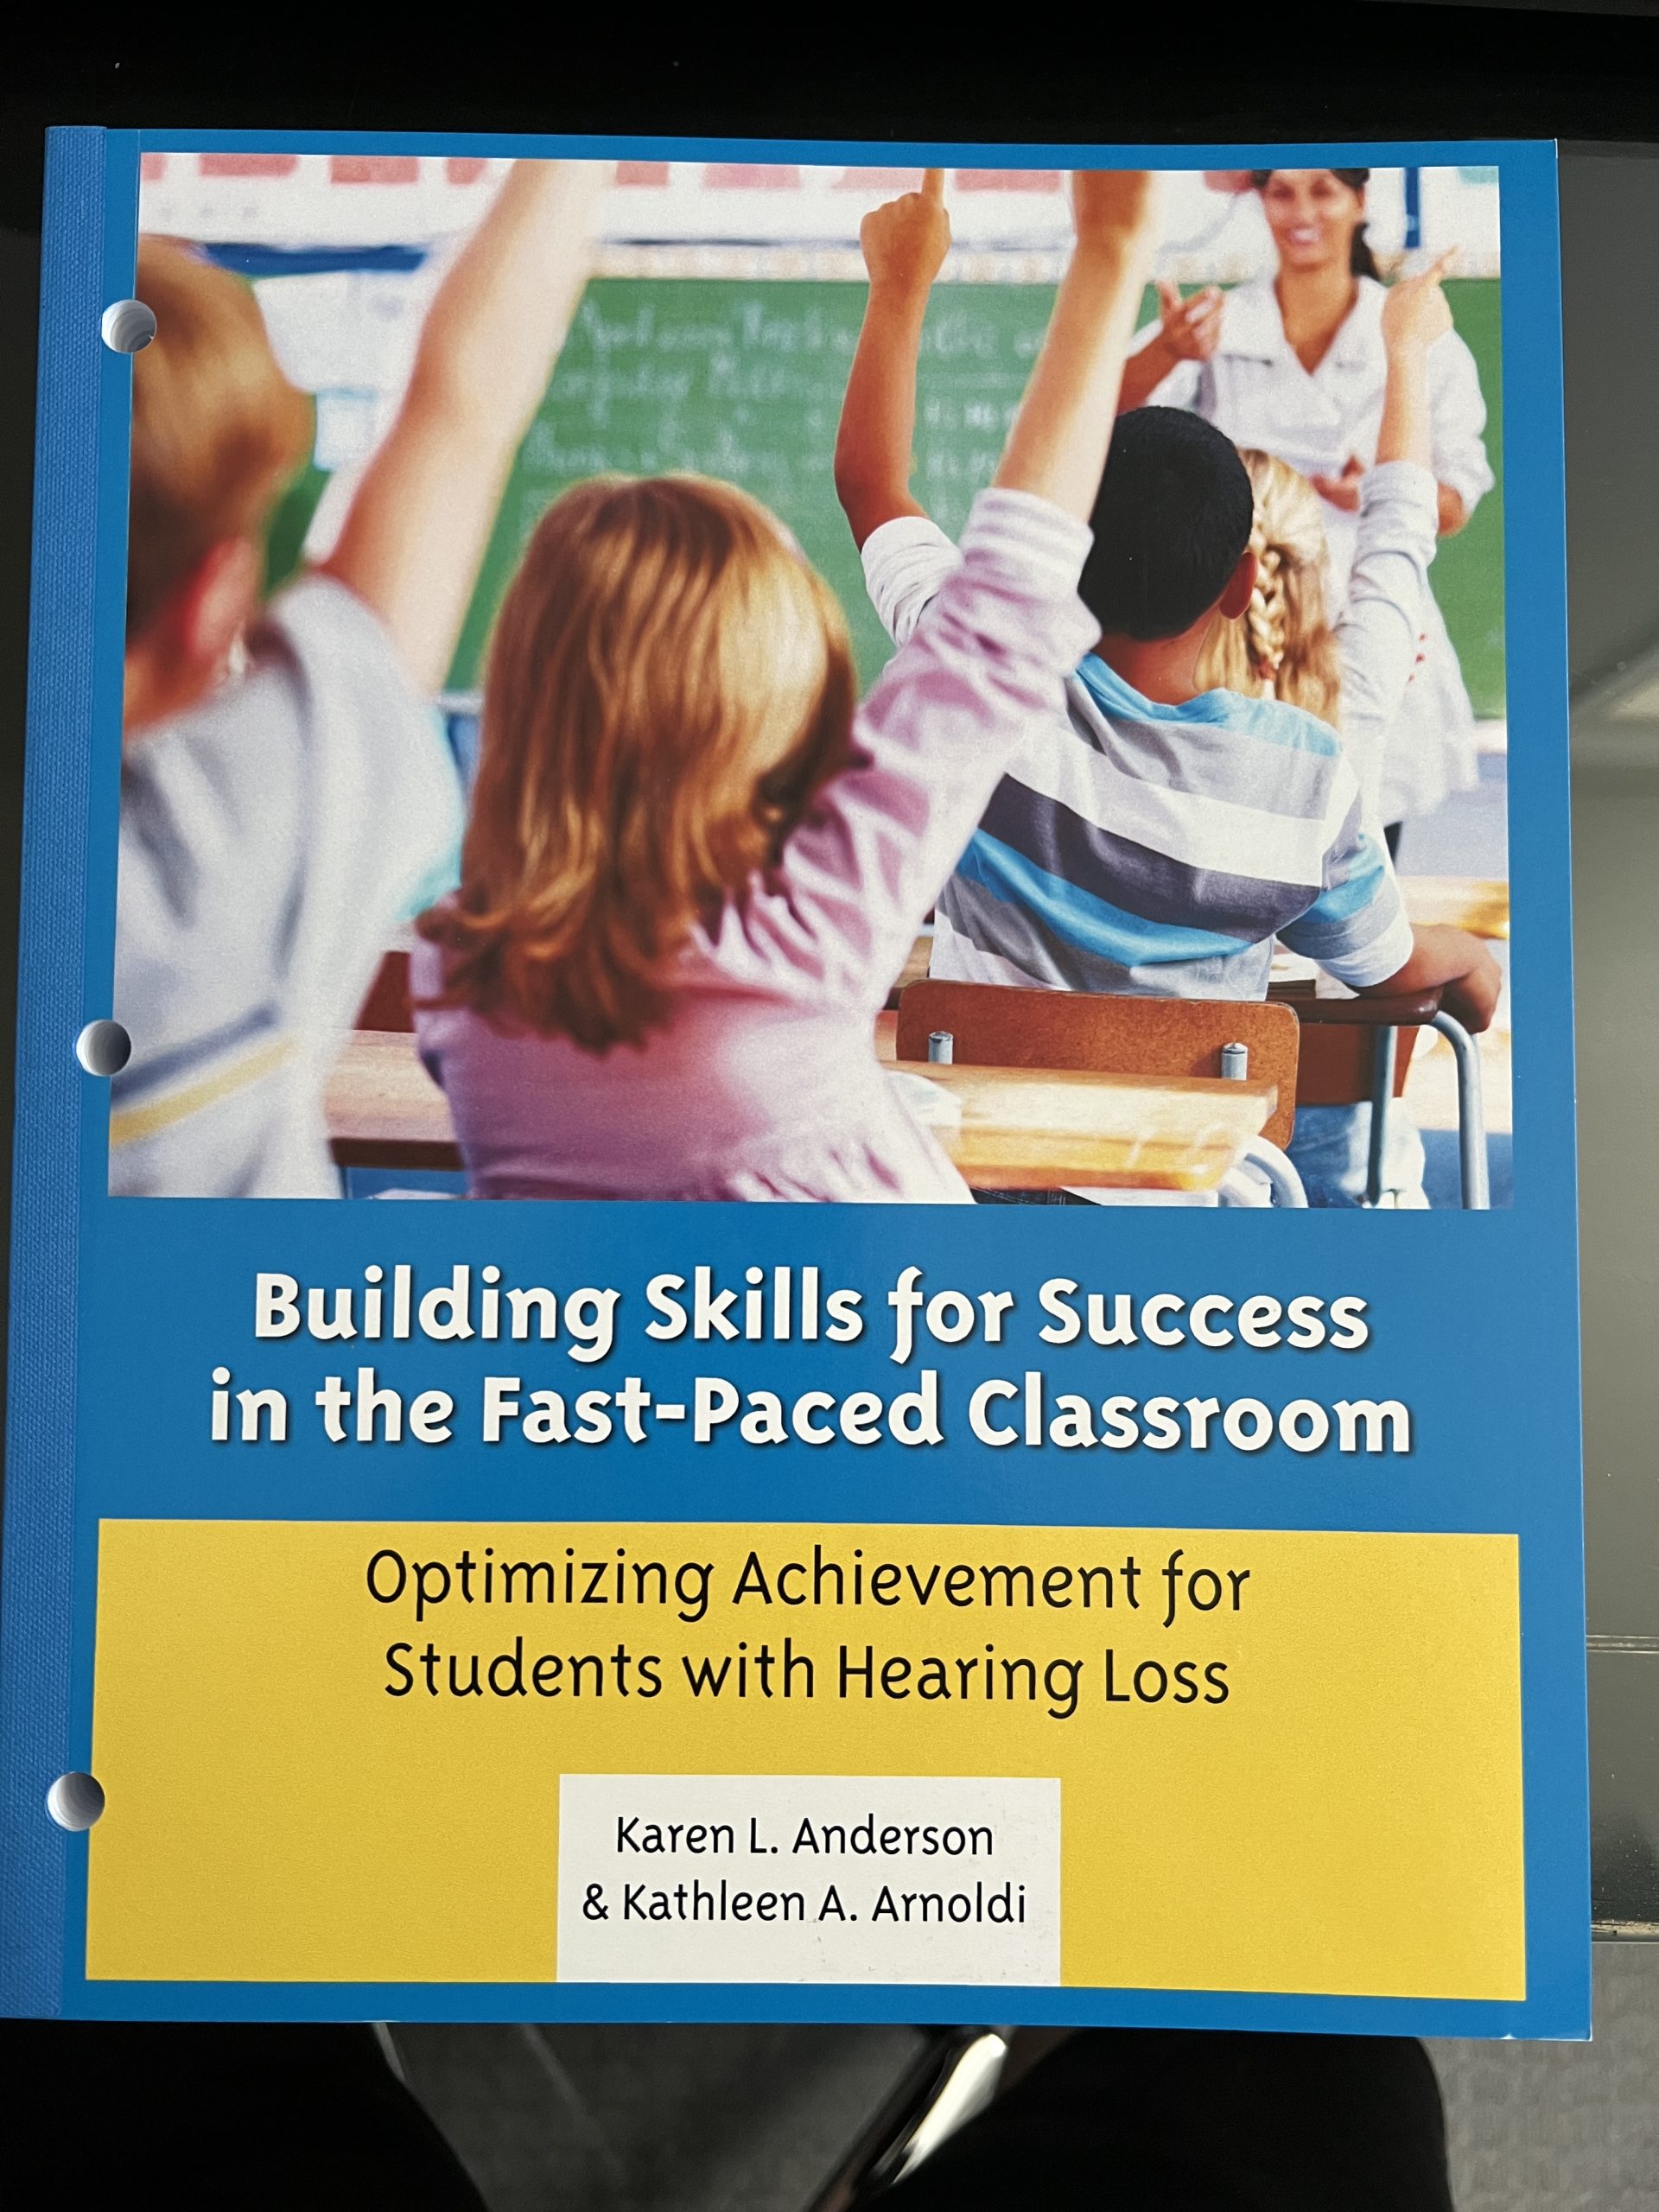 Building Skills for Success in the Fast-Paced Classroom